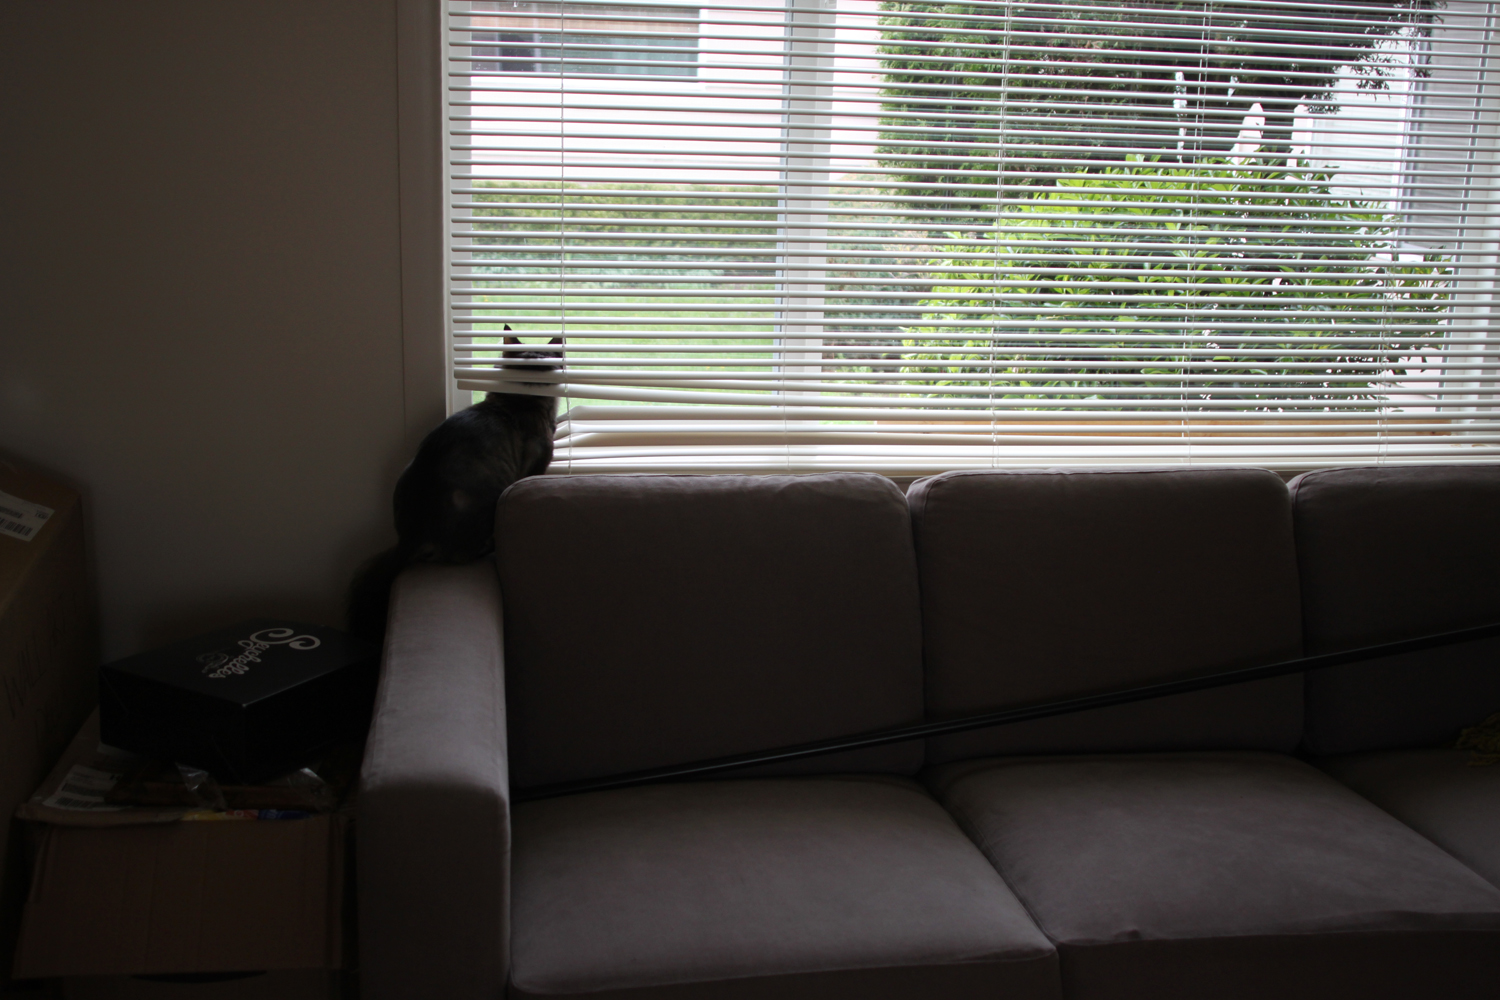 a window with blinds closed with a cat under the window seat